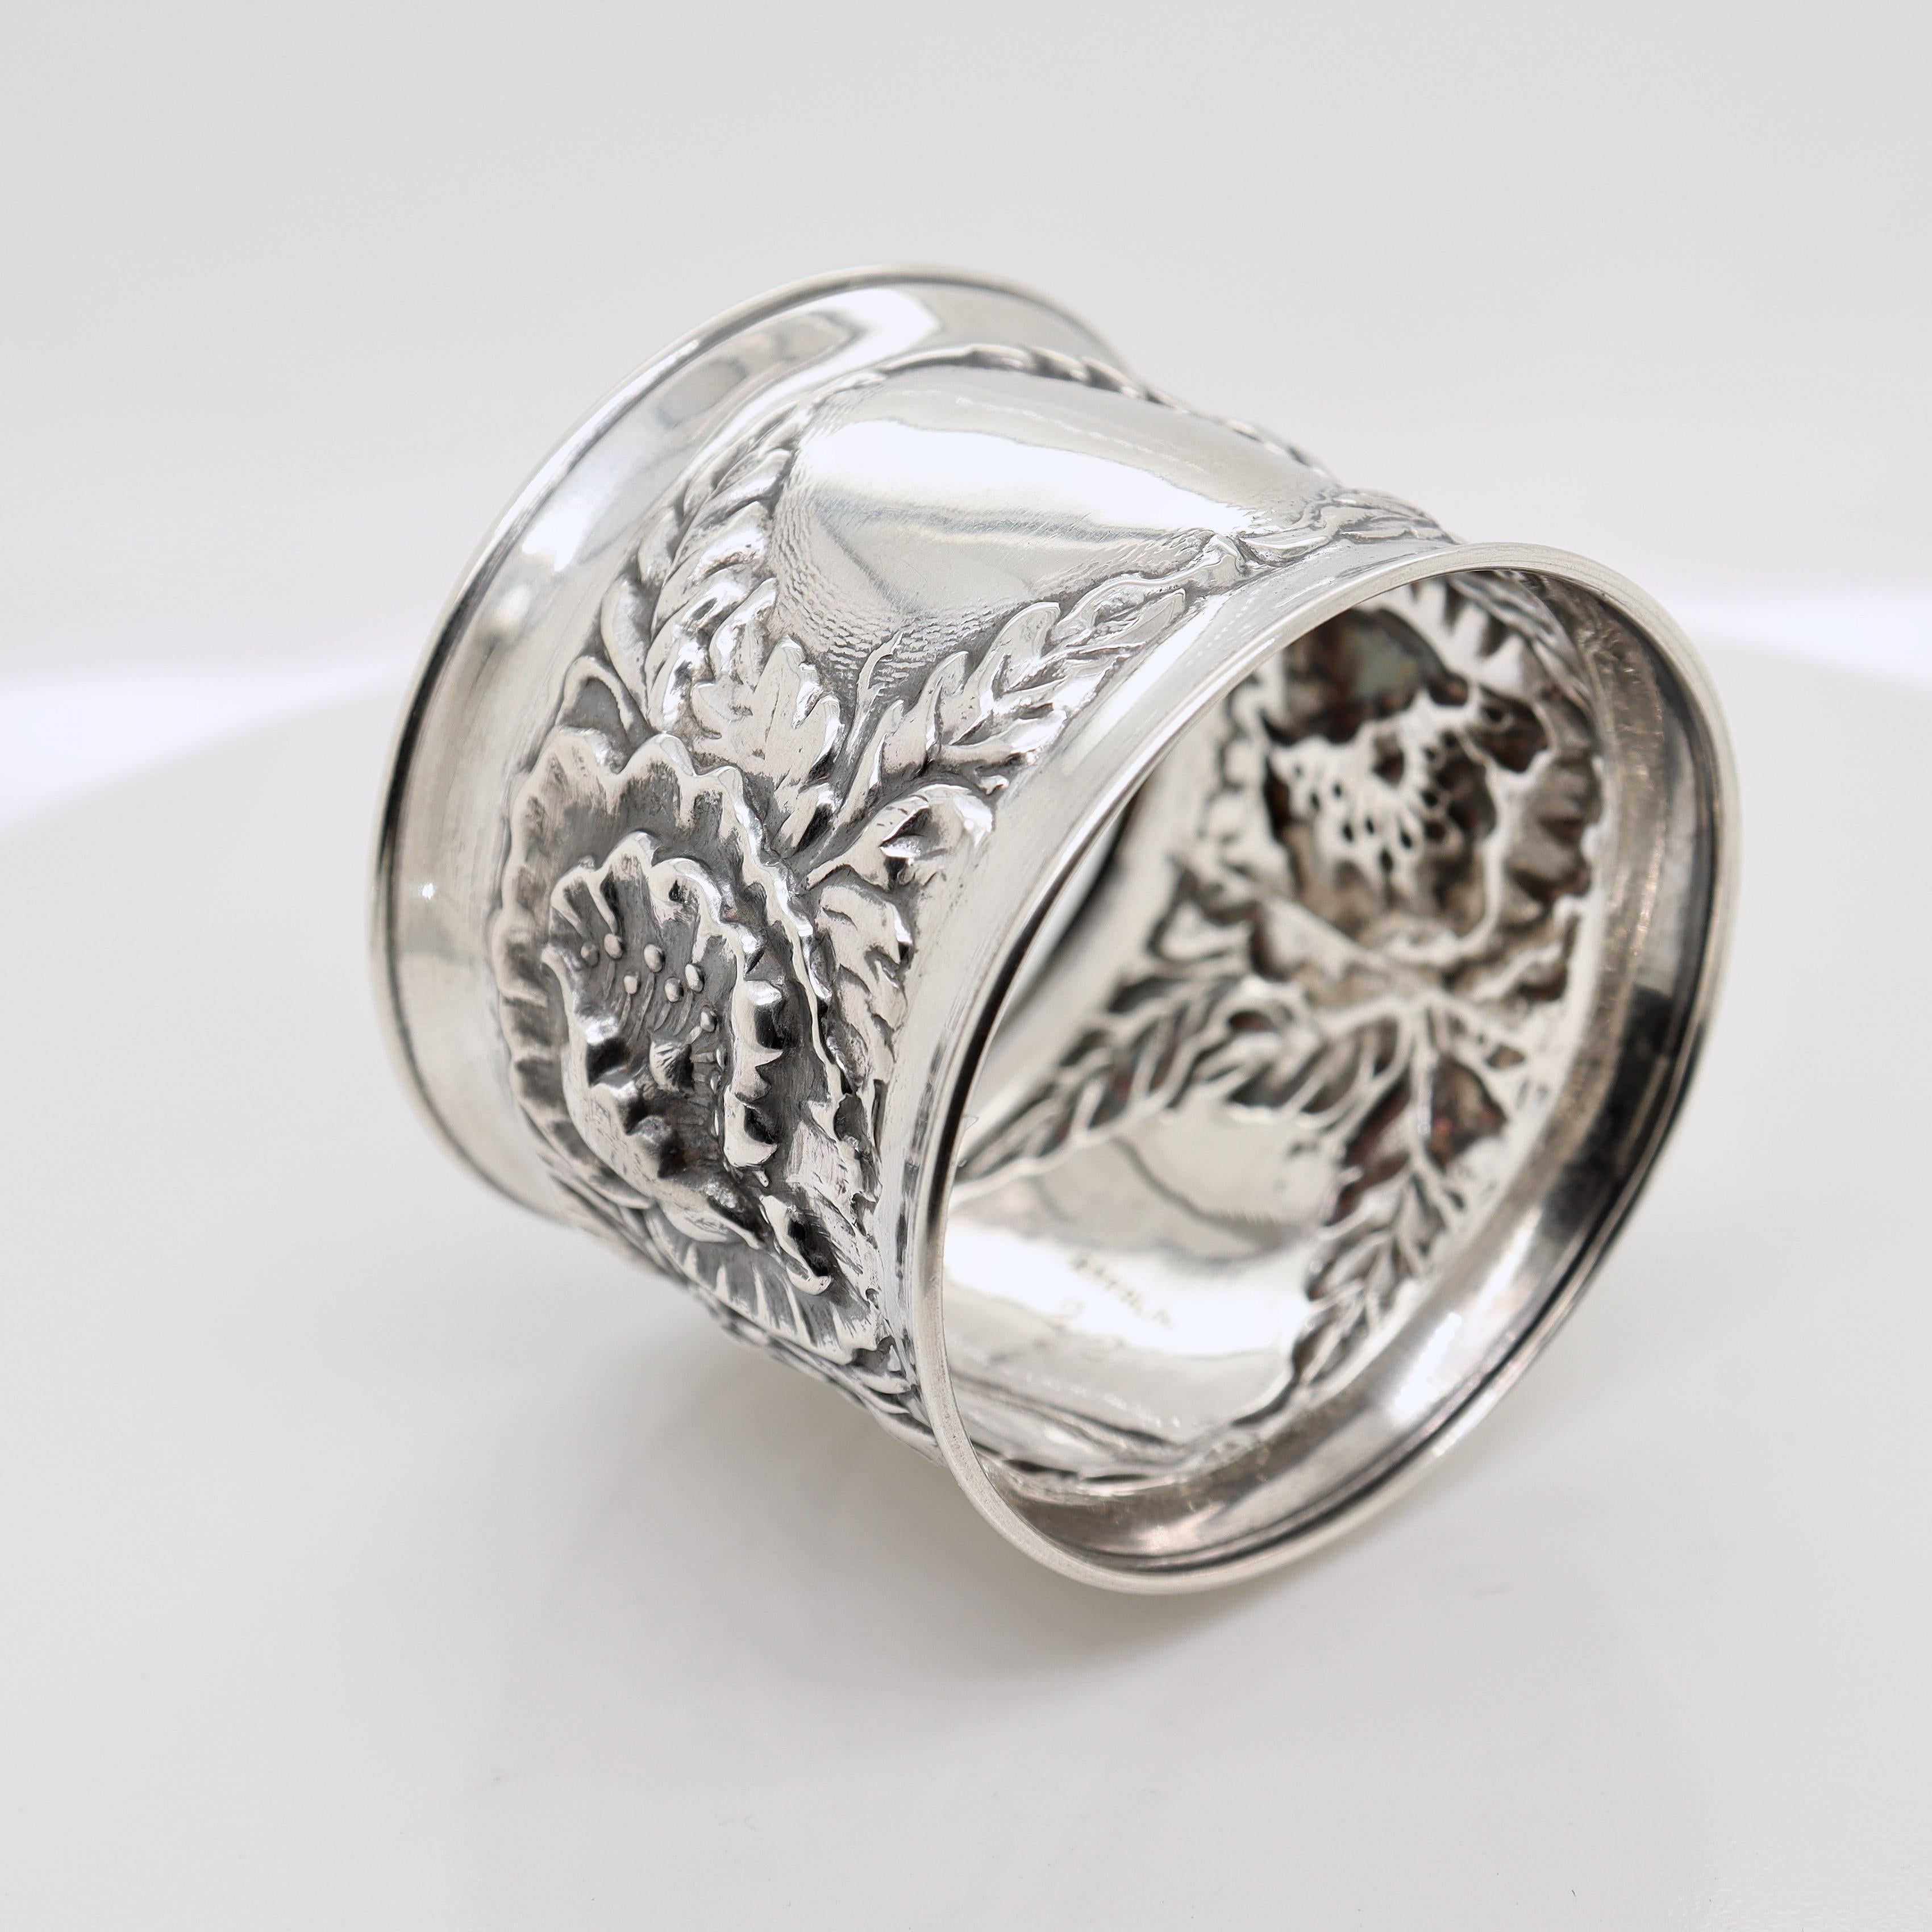 Antique Art Nouveau Sterling Silver Napkin Ring with Poppy Flowers For Sale 4